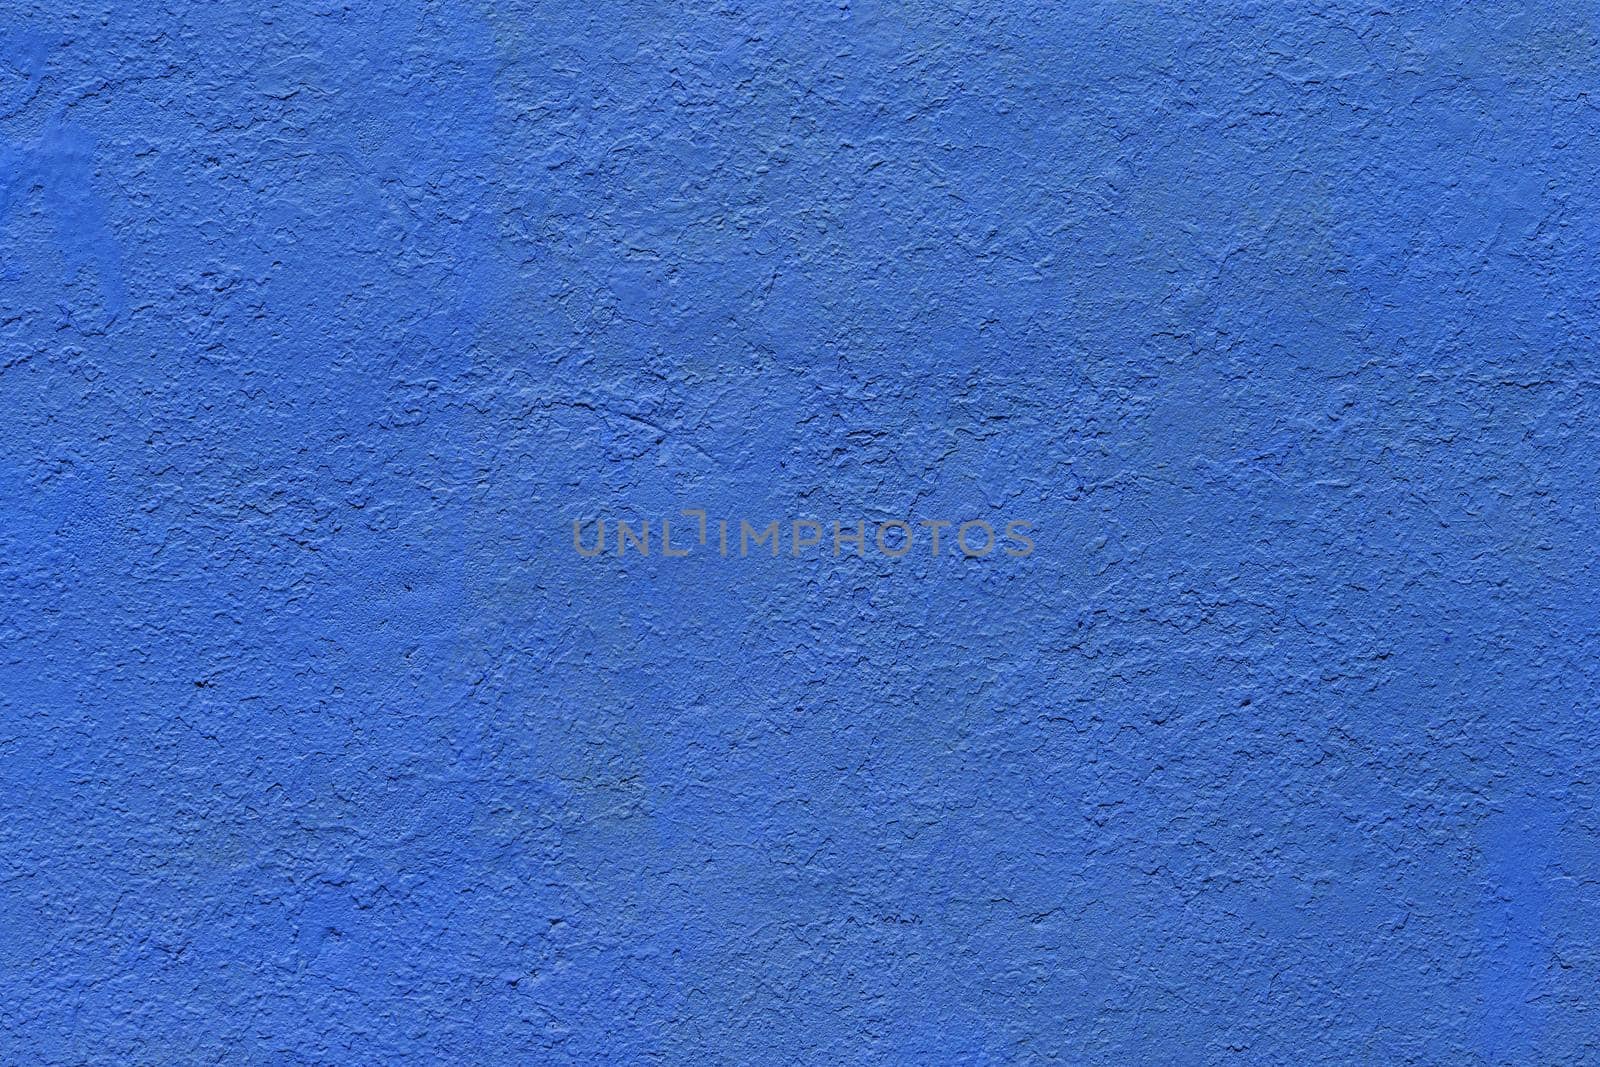 background and texture of flat thick painted matte blue surface under direct sunlight by z1b